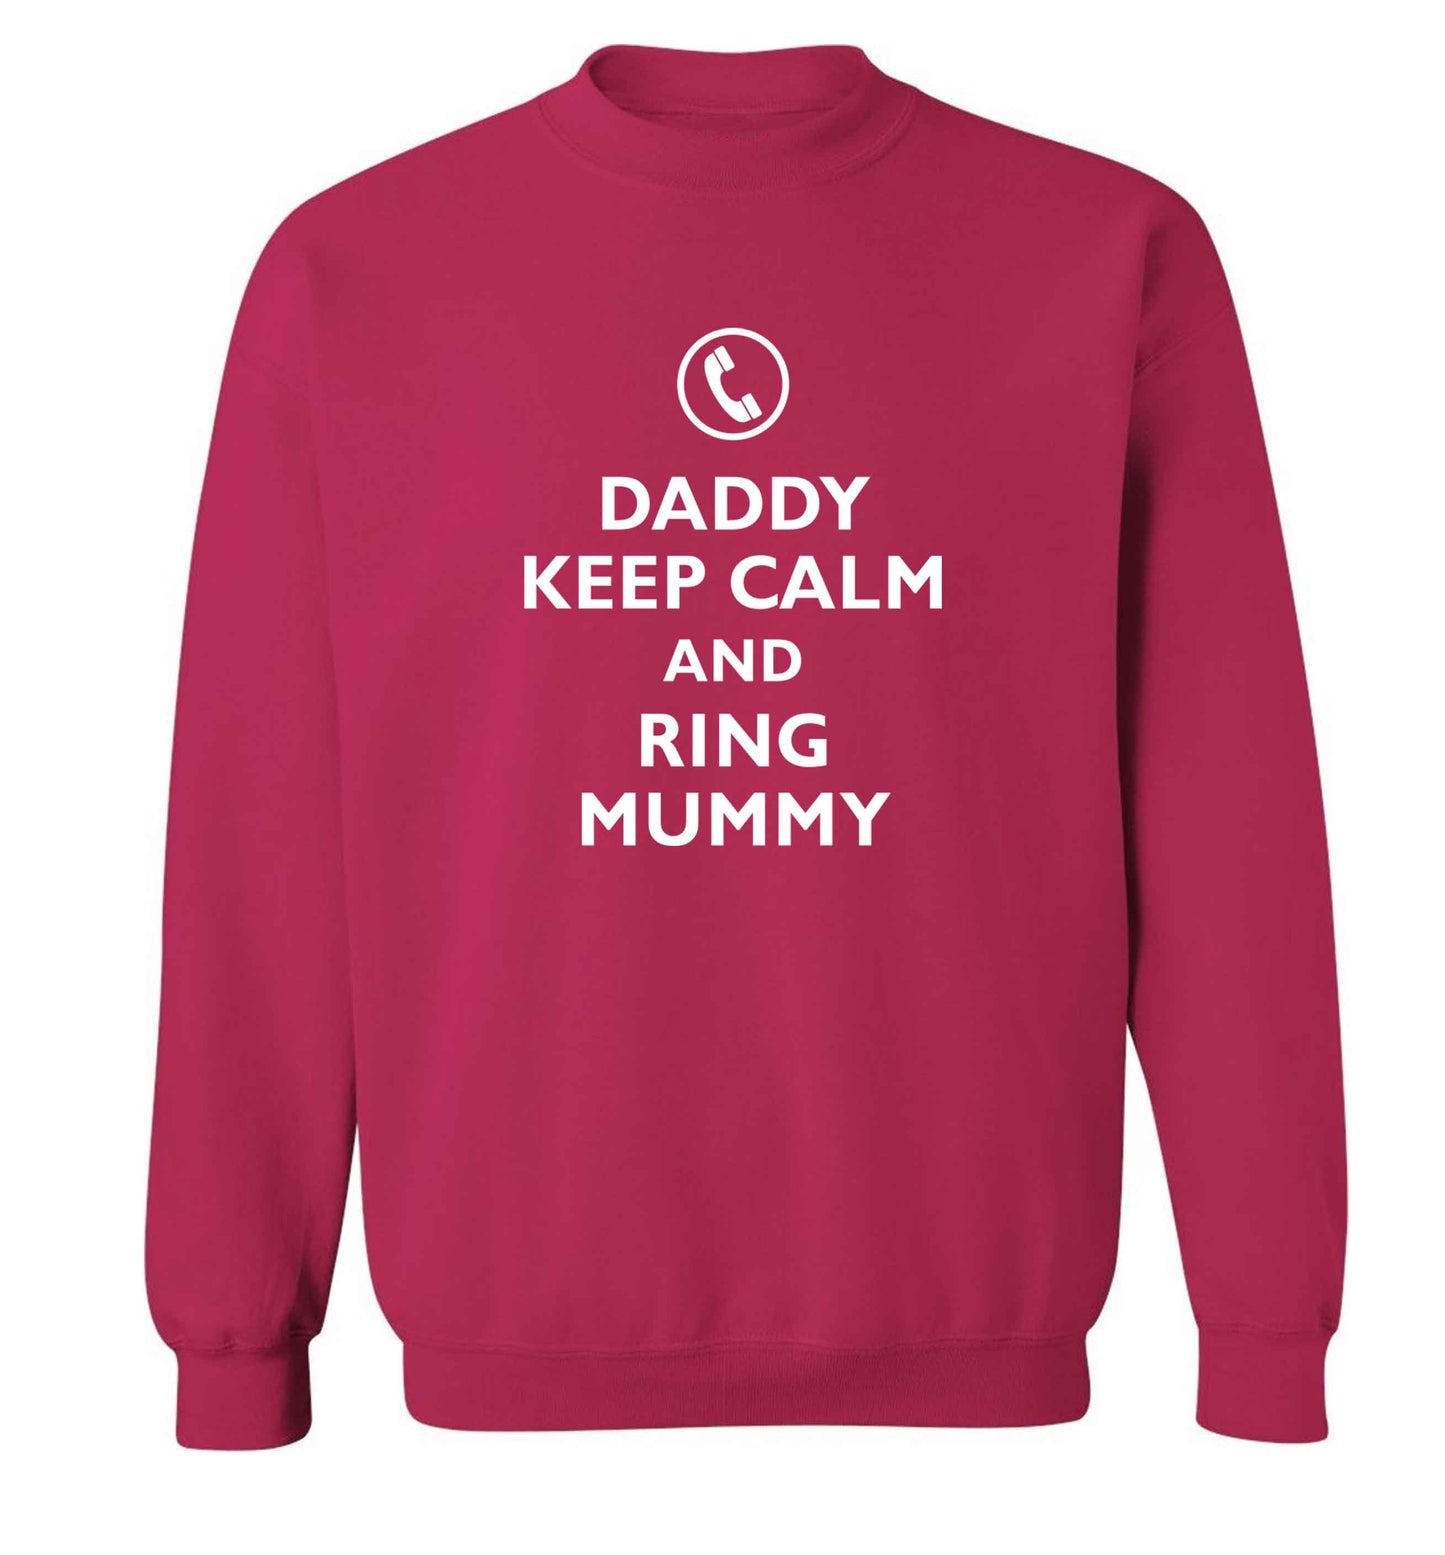 Daddy keep calm and ring mummy adult's unisex pink sweater 2XL